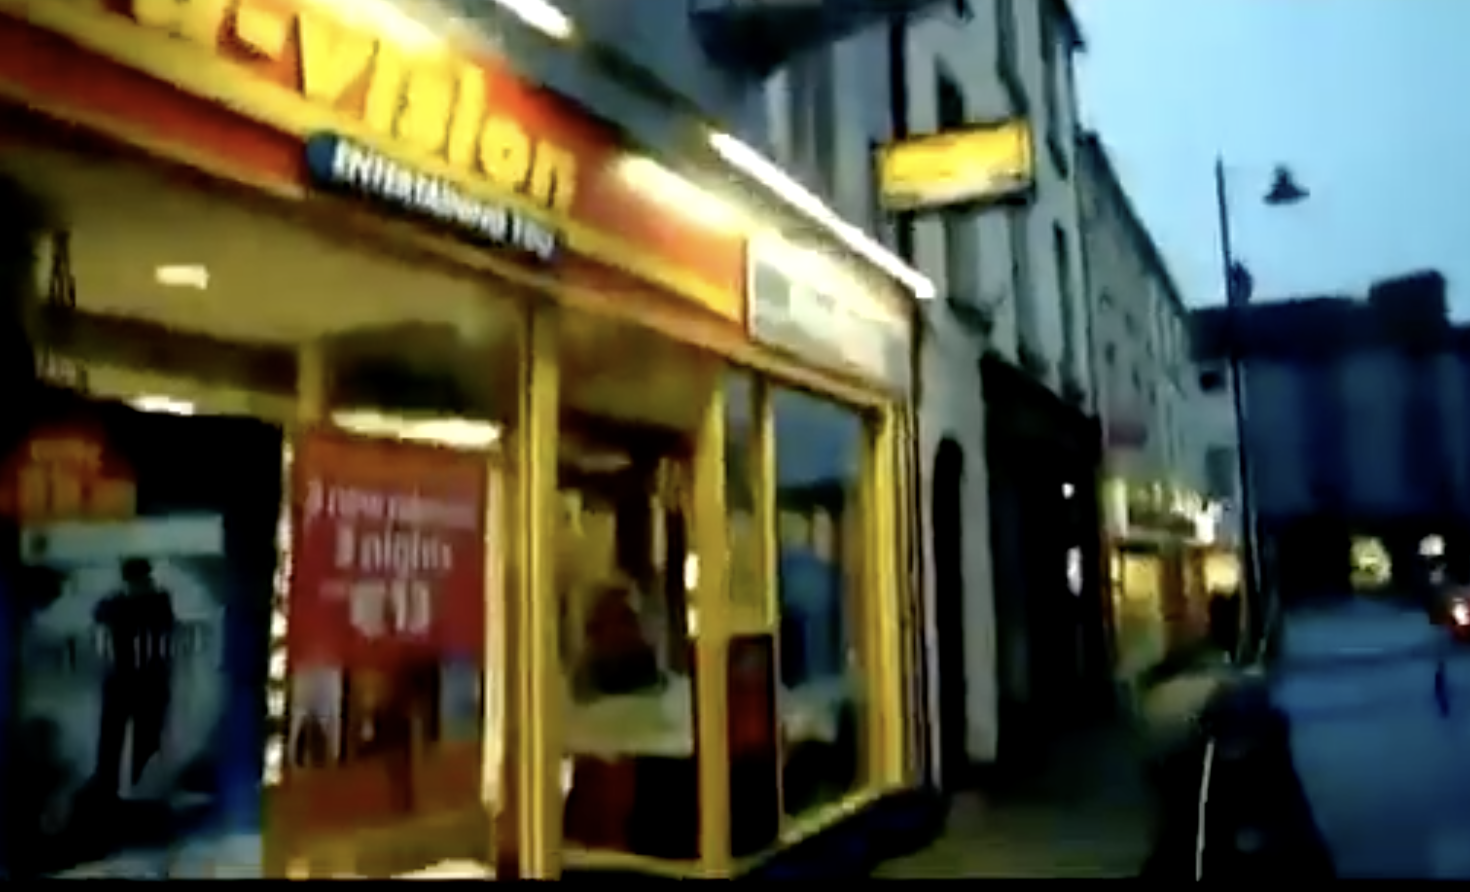 WATCH: This clip of an old Xtra Vision shop will give you serious nostalgia 